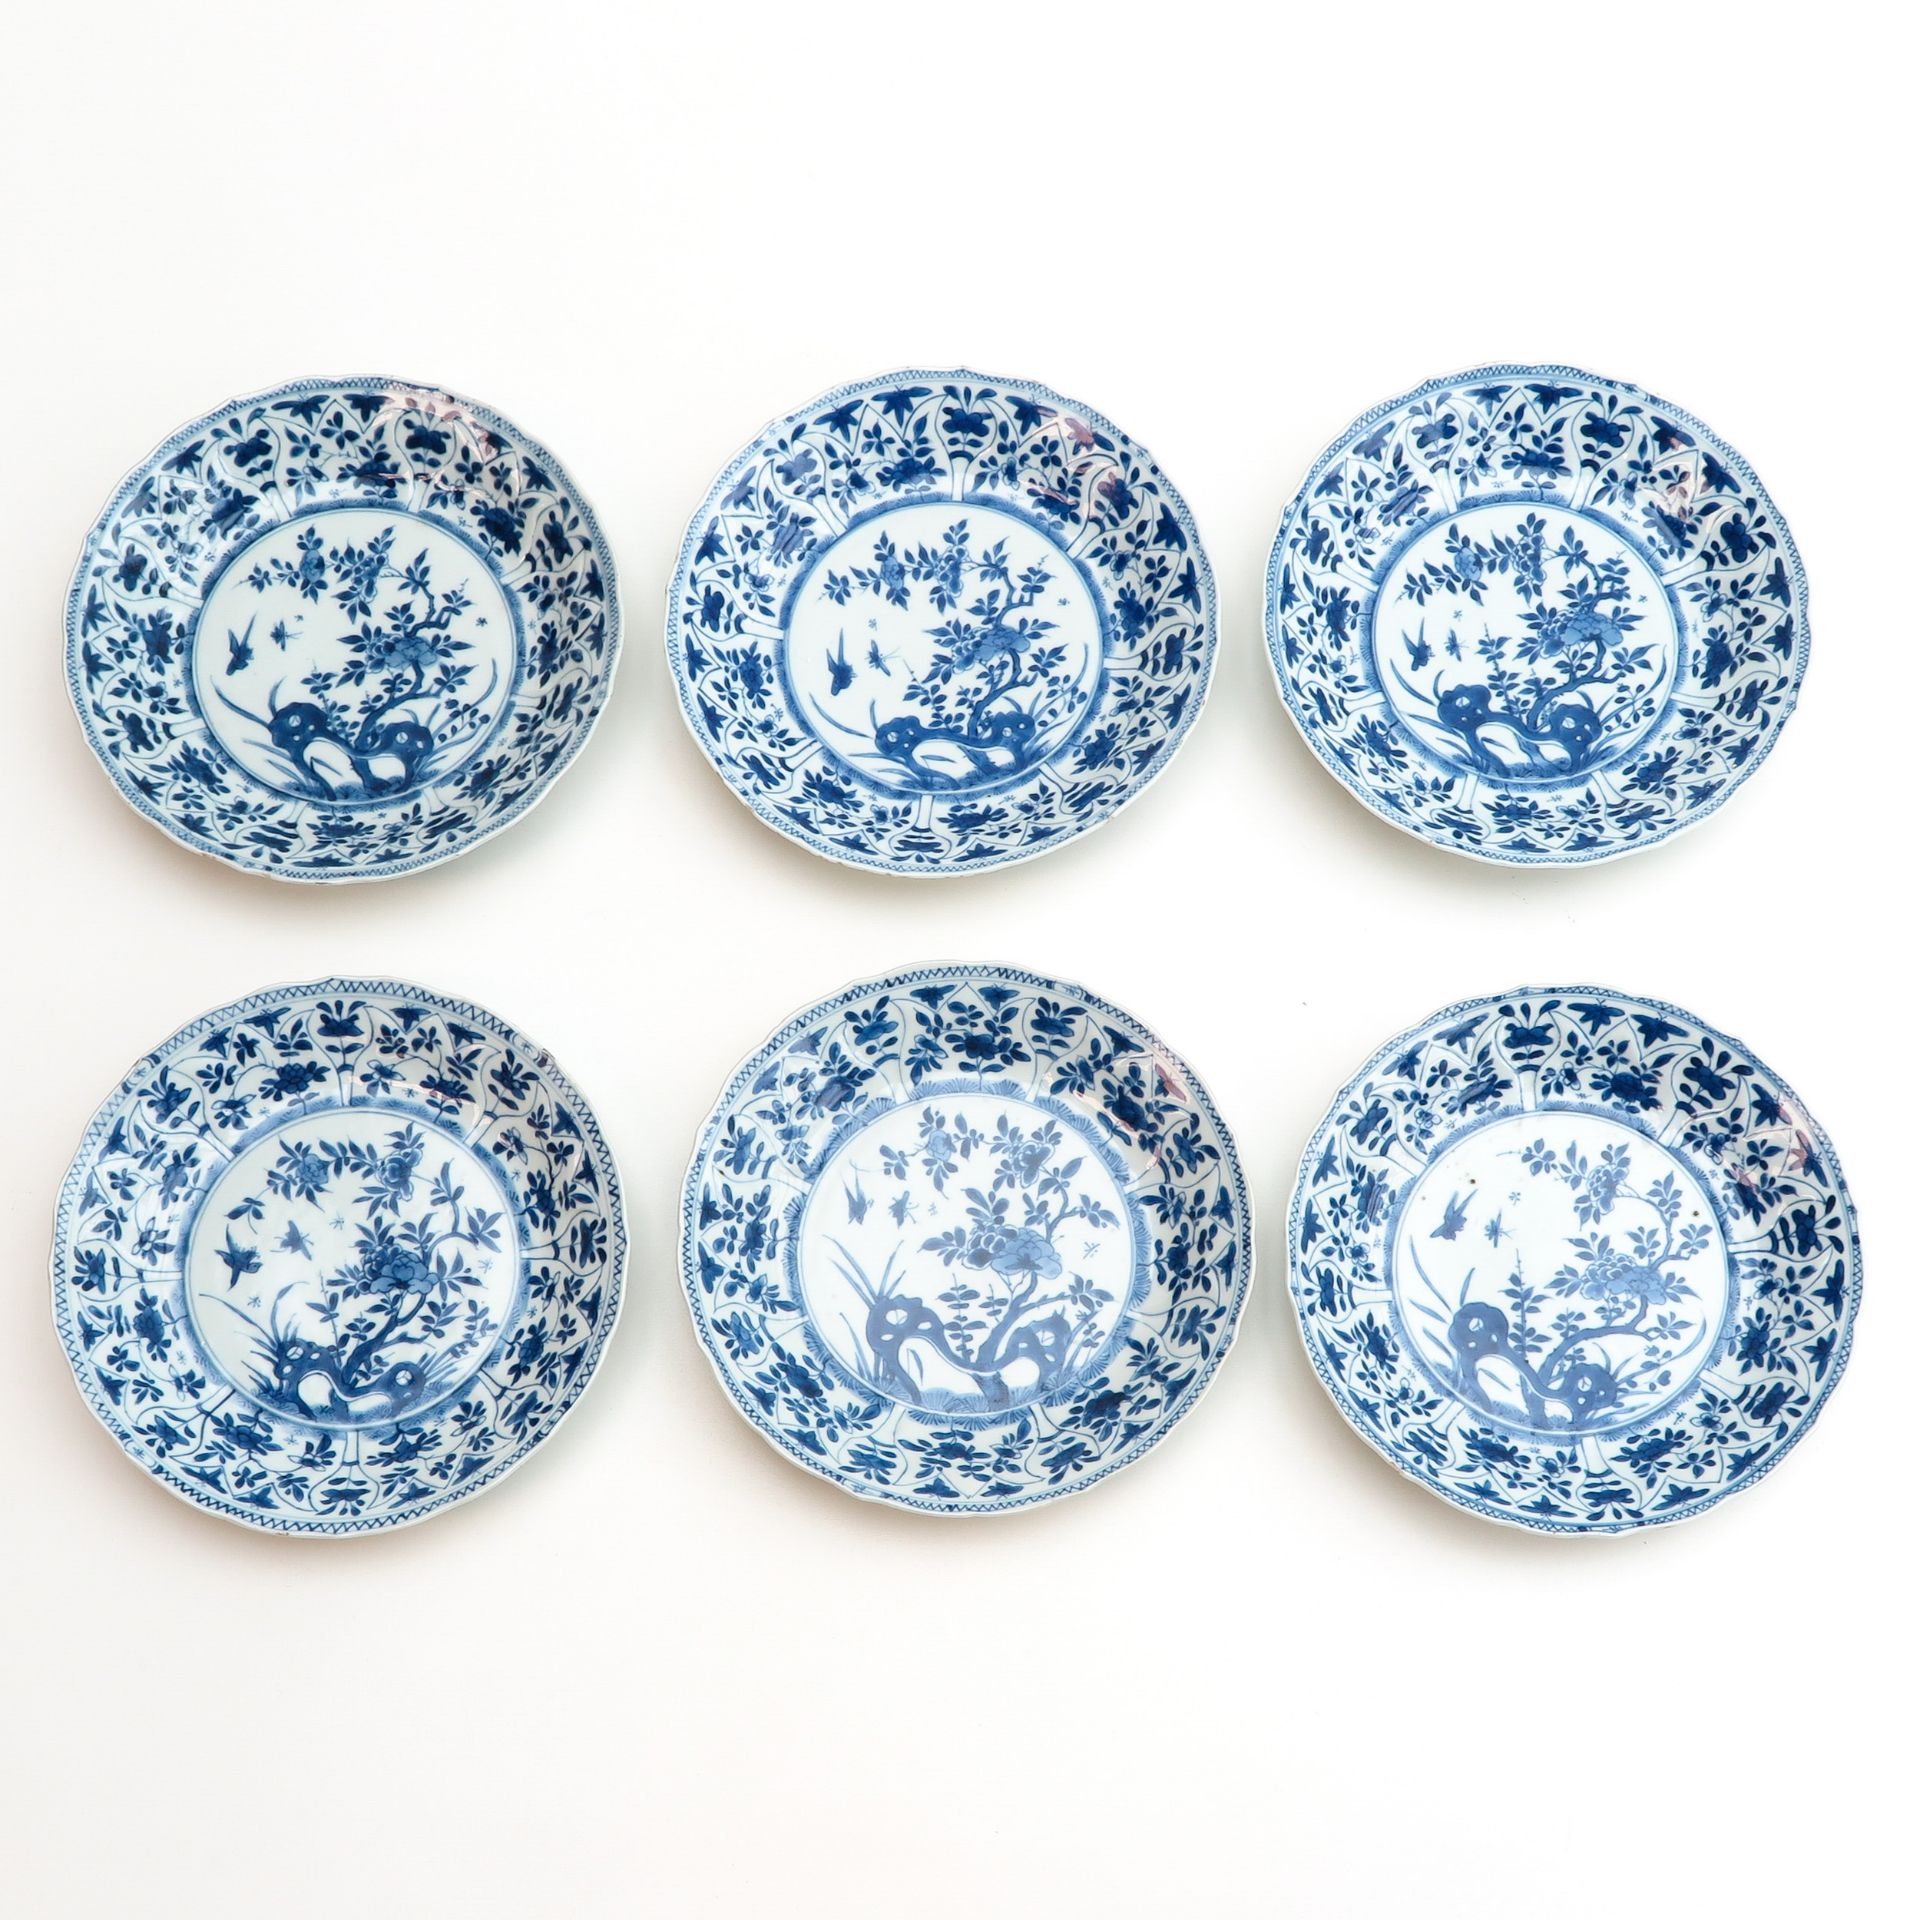 A Series of Six Blue and White Plates